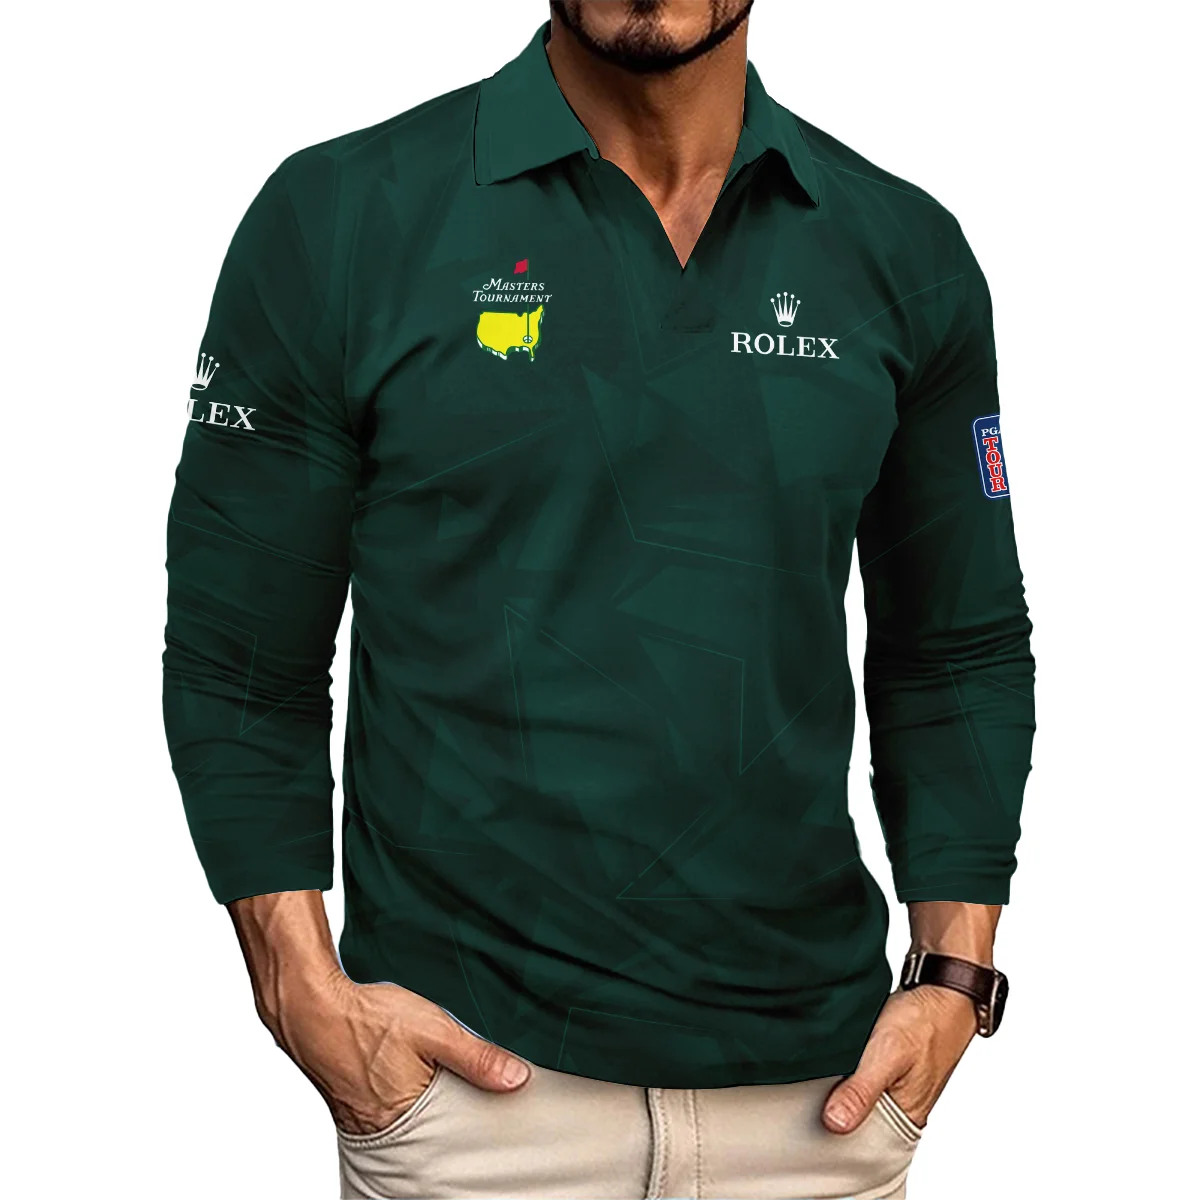 Dark Green Abstract Sport Masters Tournament Rolex Bomber Jacket Style Classic Bomber Jacket